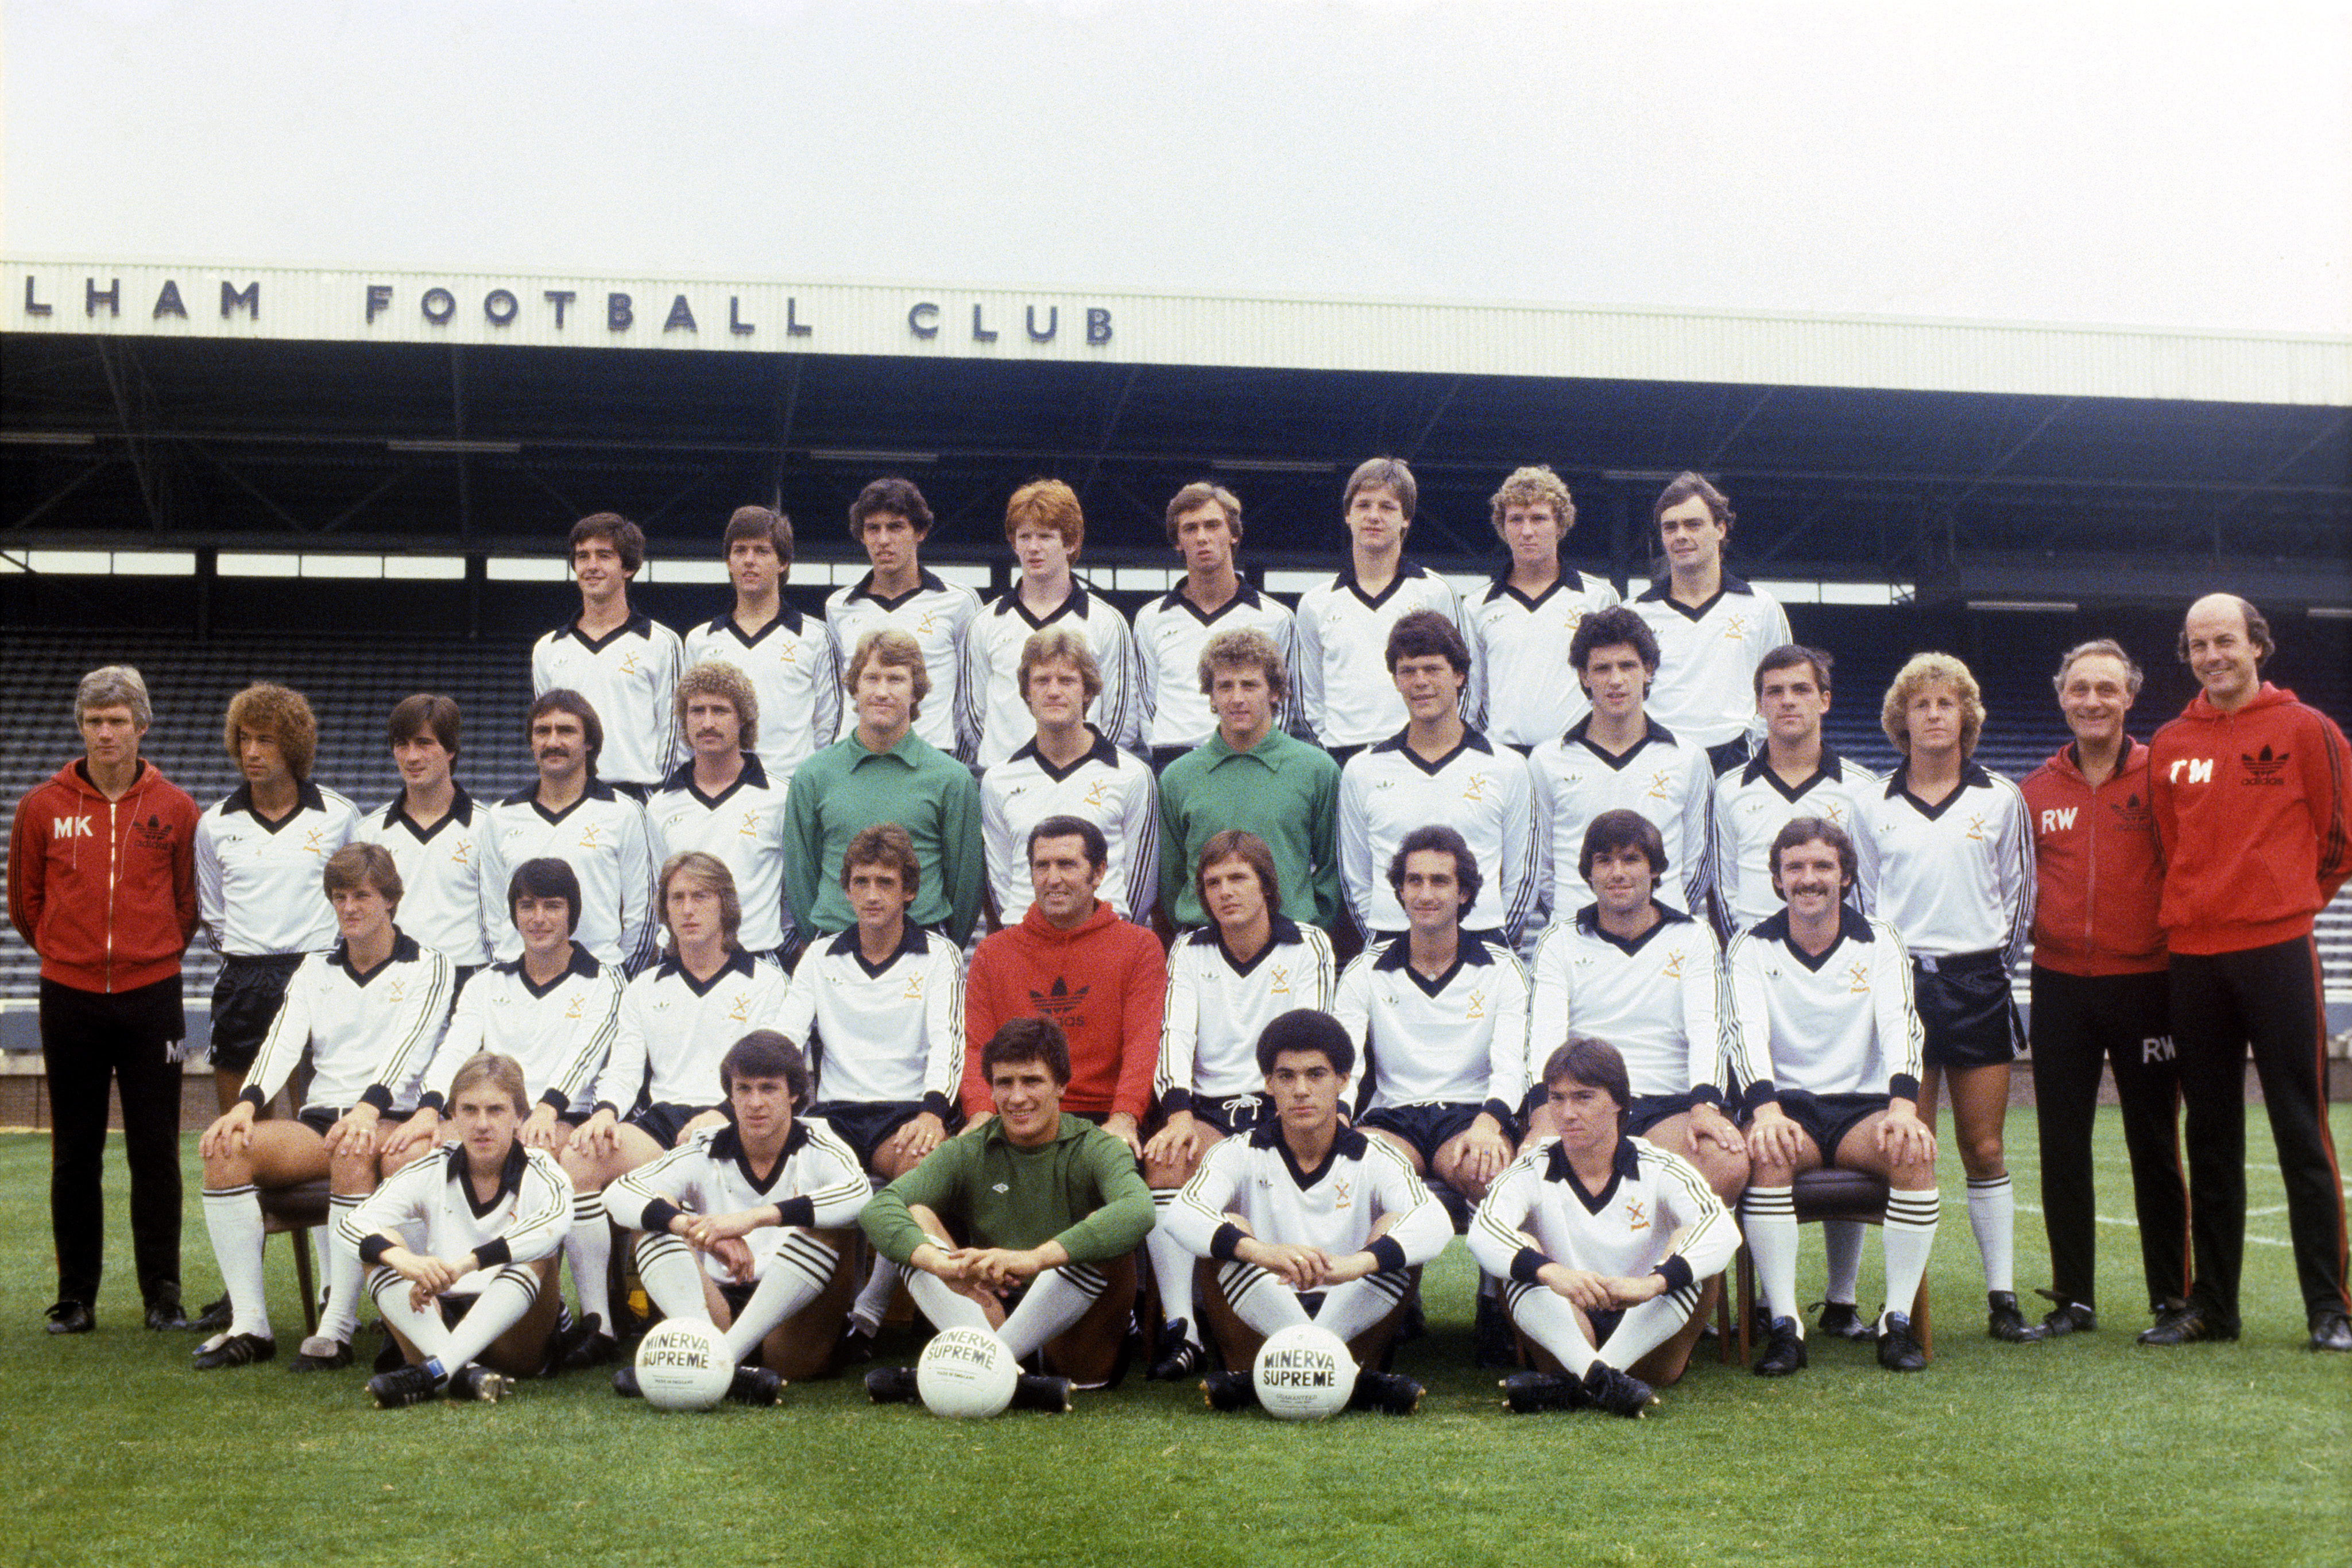 Soccer - League Division Two - Fulham Photocall - Craven Cottage